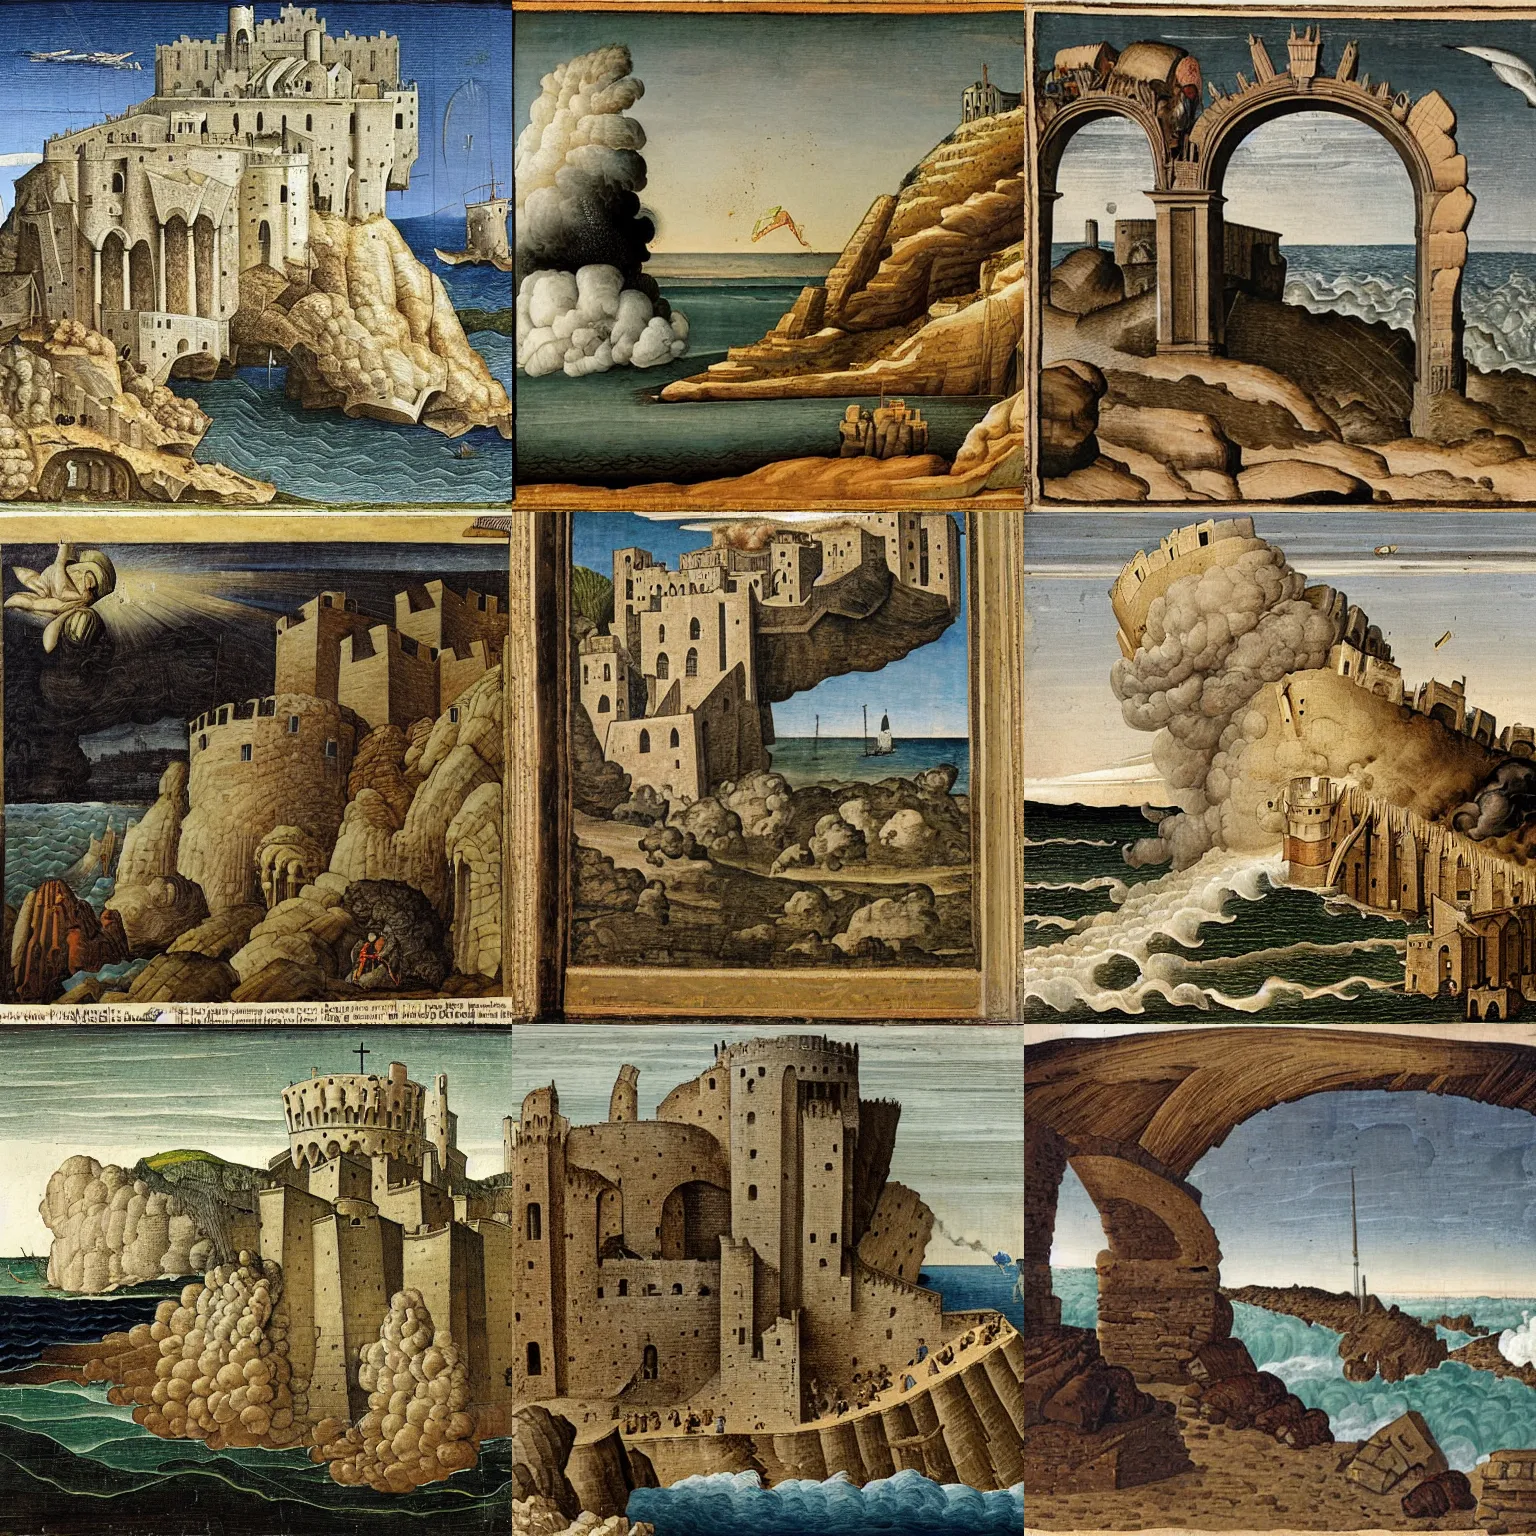 Prompt: a nuklear bomb explodes in a fortress on a steep rock in the ocean, by crivelli, carlo